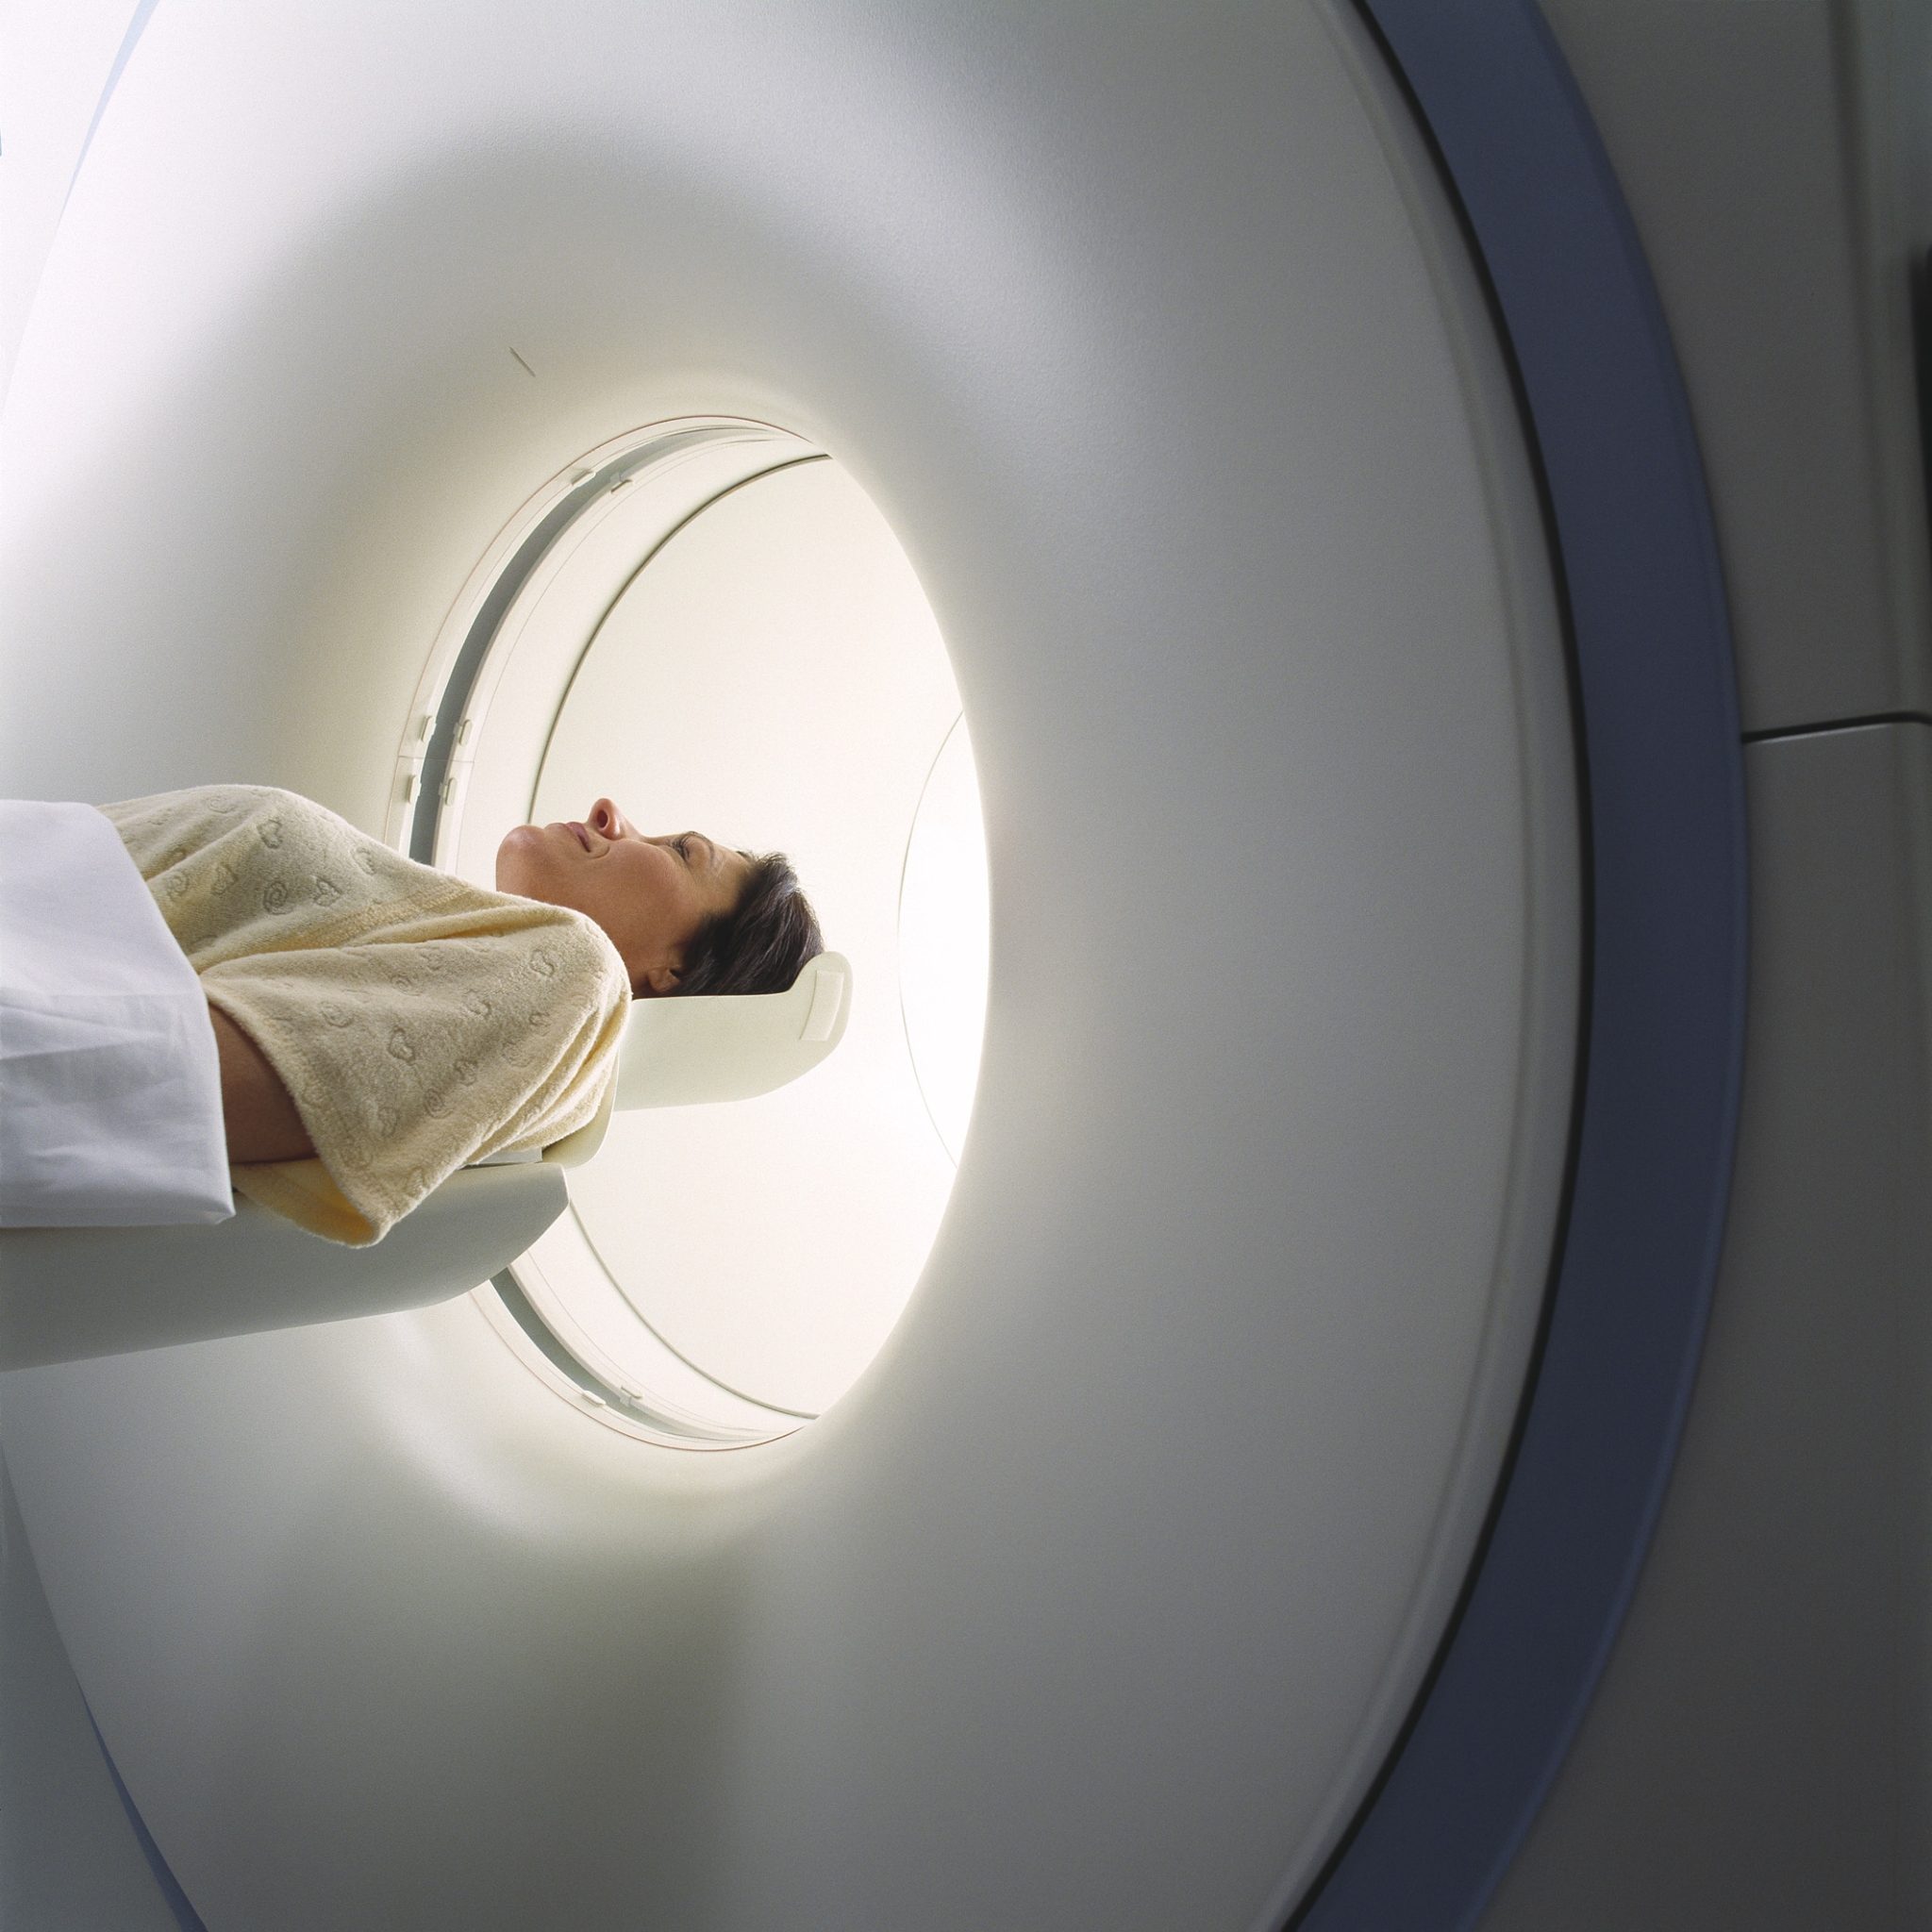 The first PET/CT system in Europe